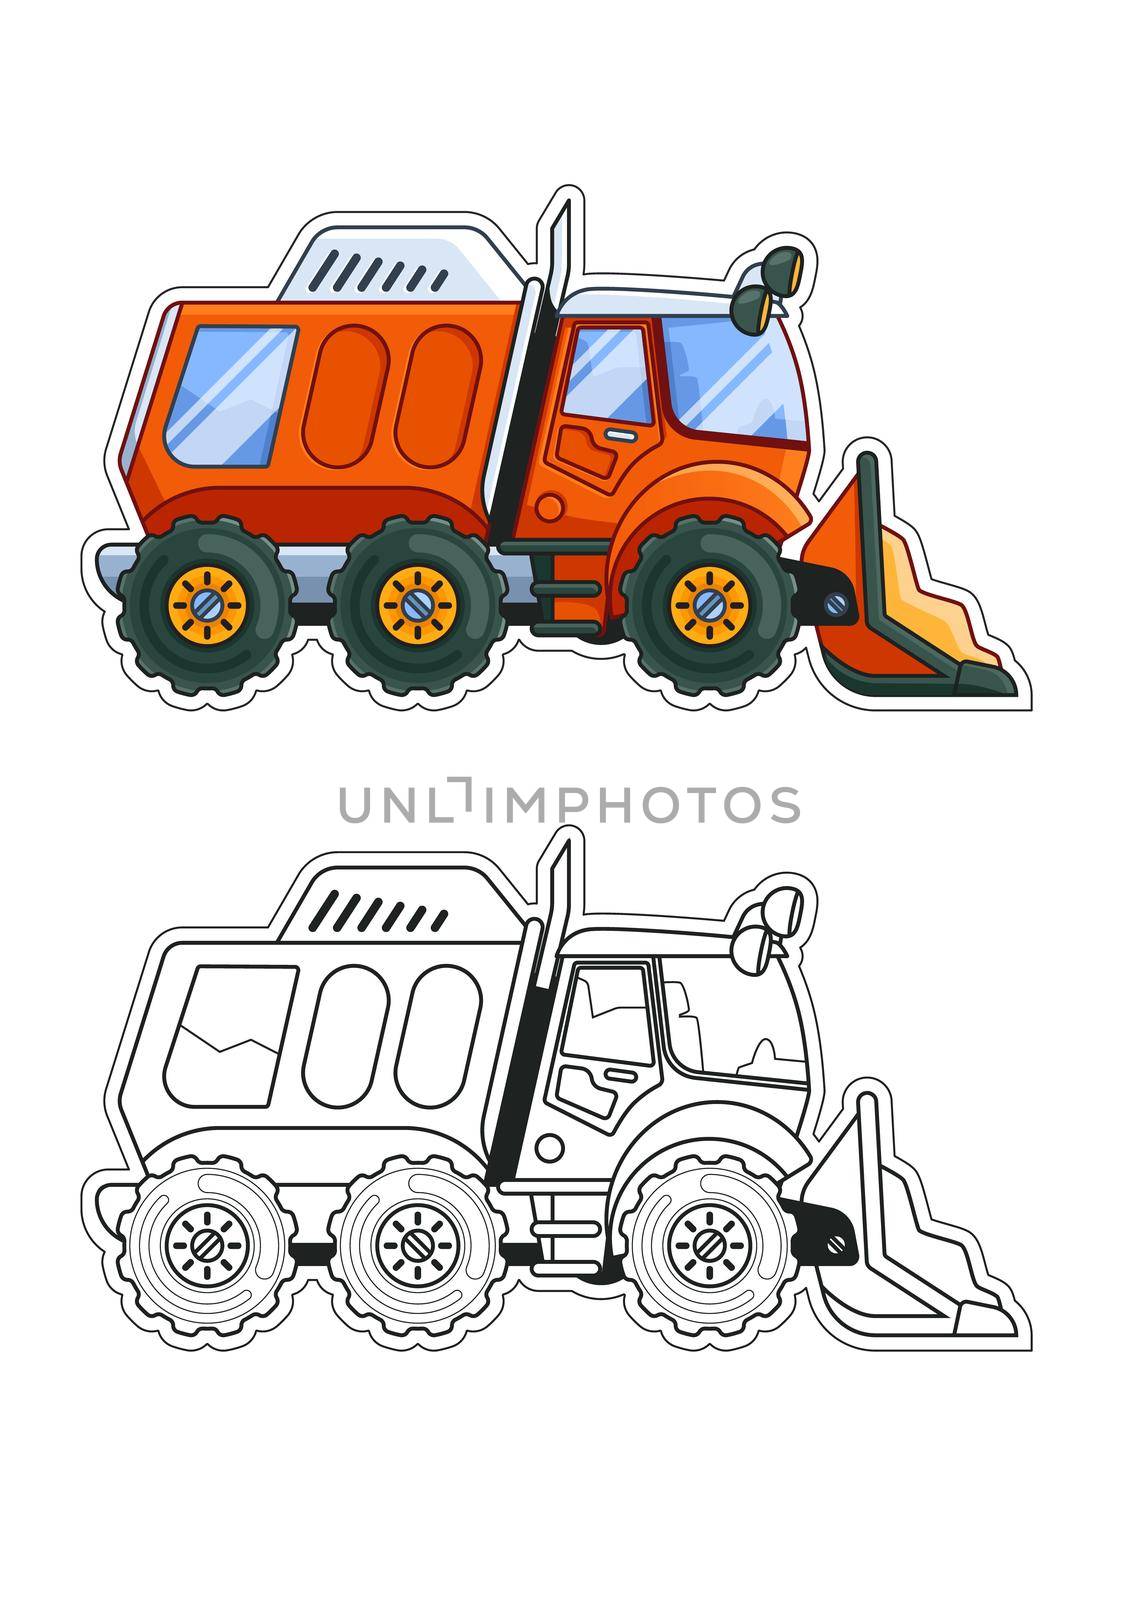 Orange Cleaning Truck Side View Coloring Book by vmalafeevskiy